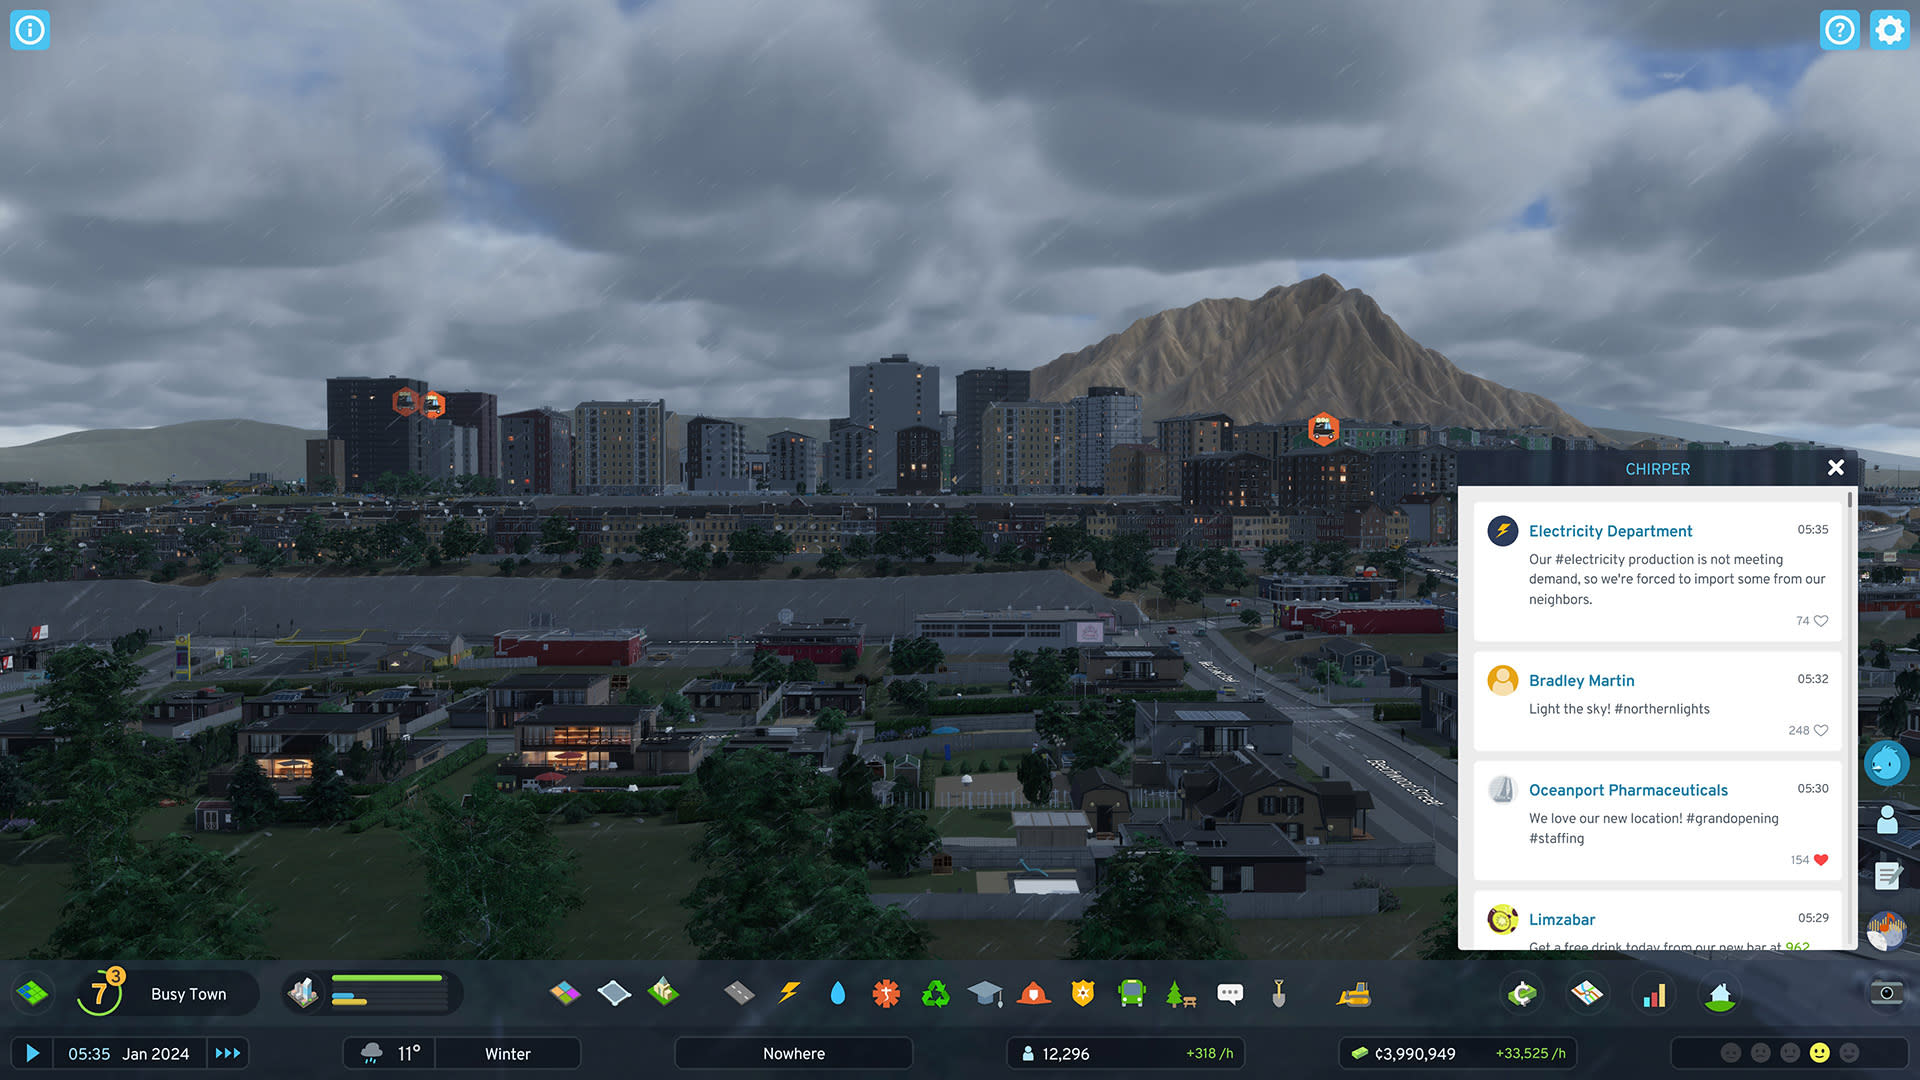 Cities Skylines 2 mod transfer and multiplayer hopes dashed, kind of